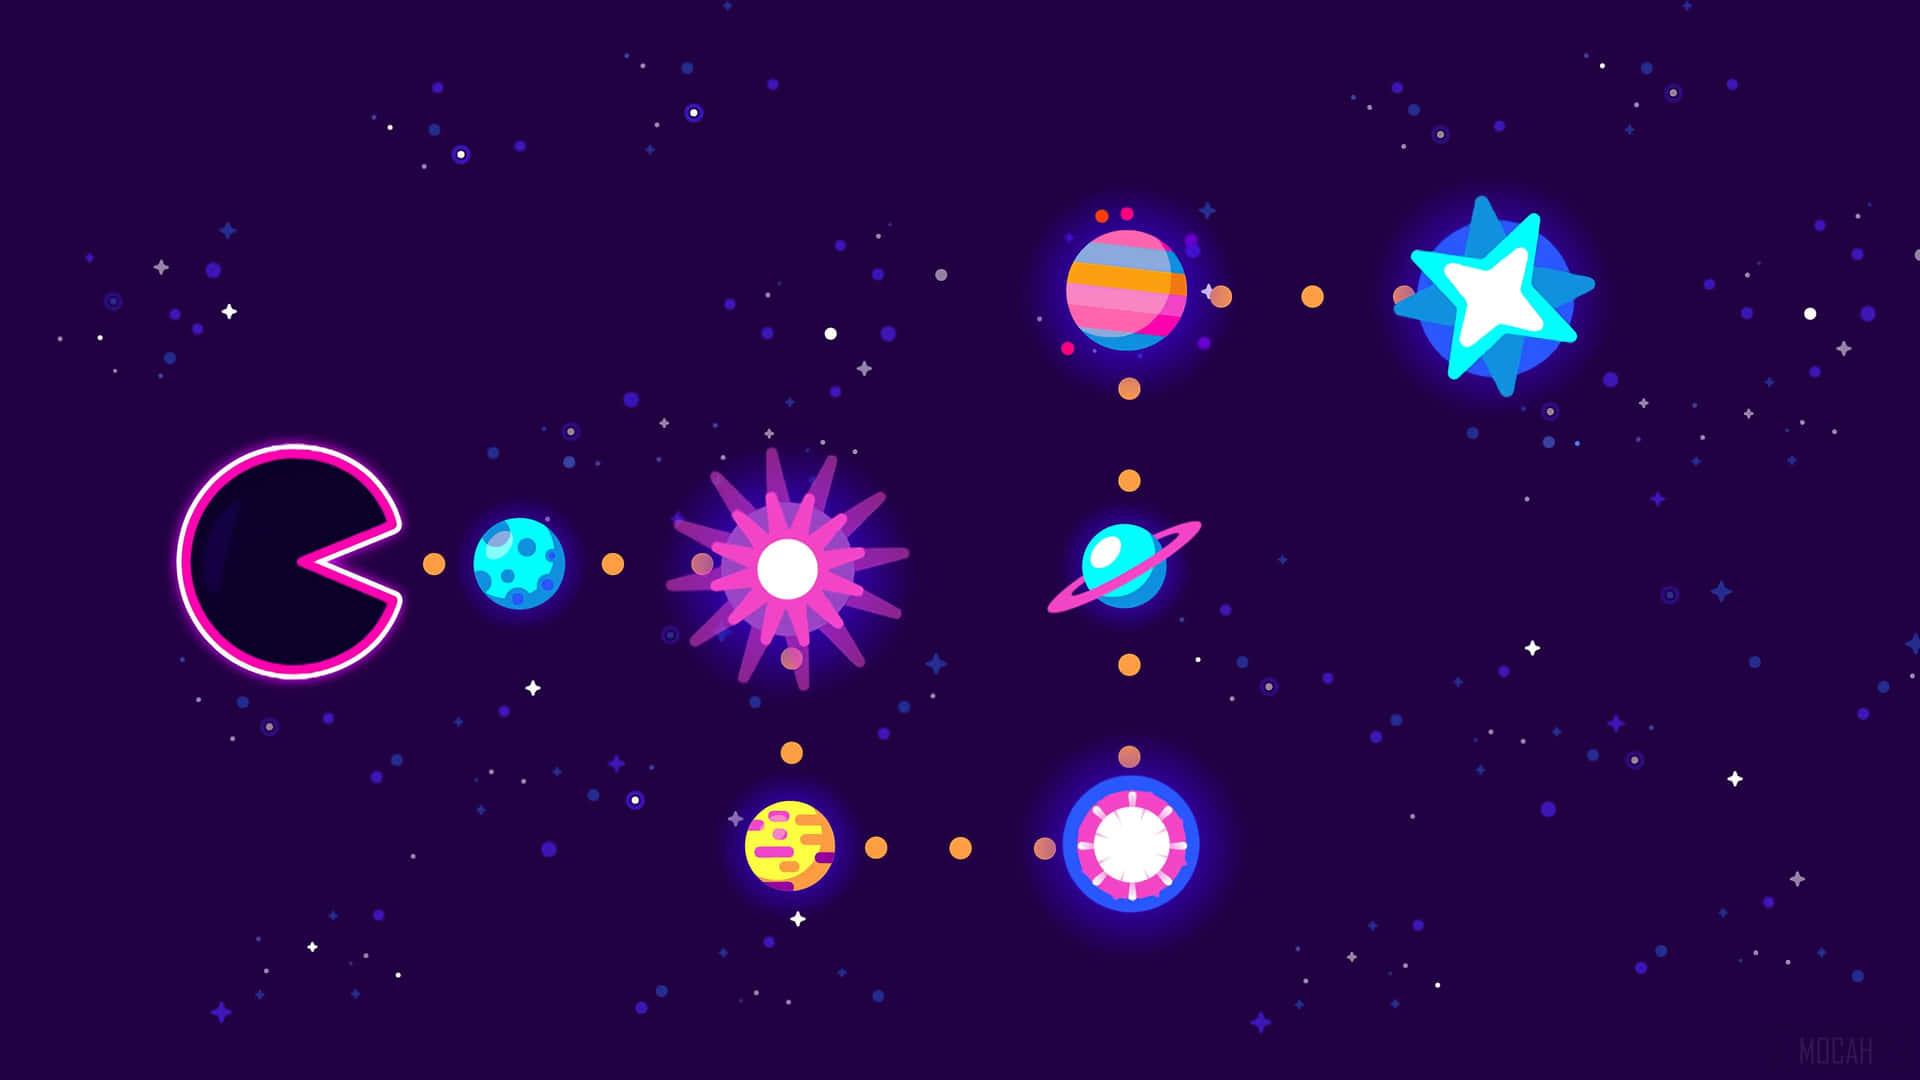 "Have a blast playing the classic arcade classic Pacman!" Wallpaper